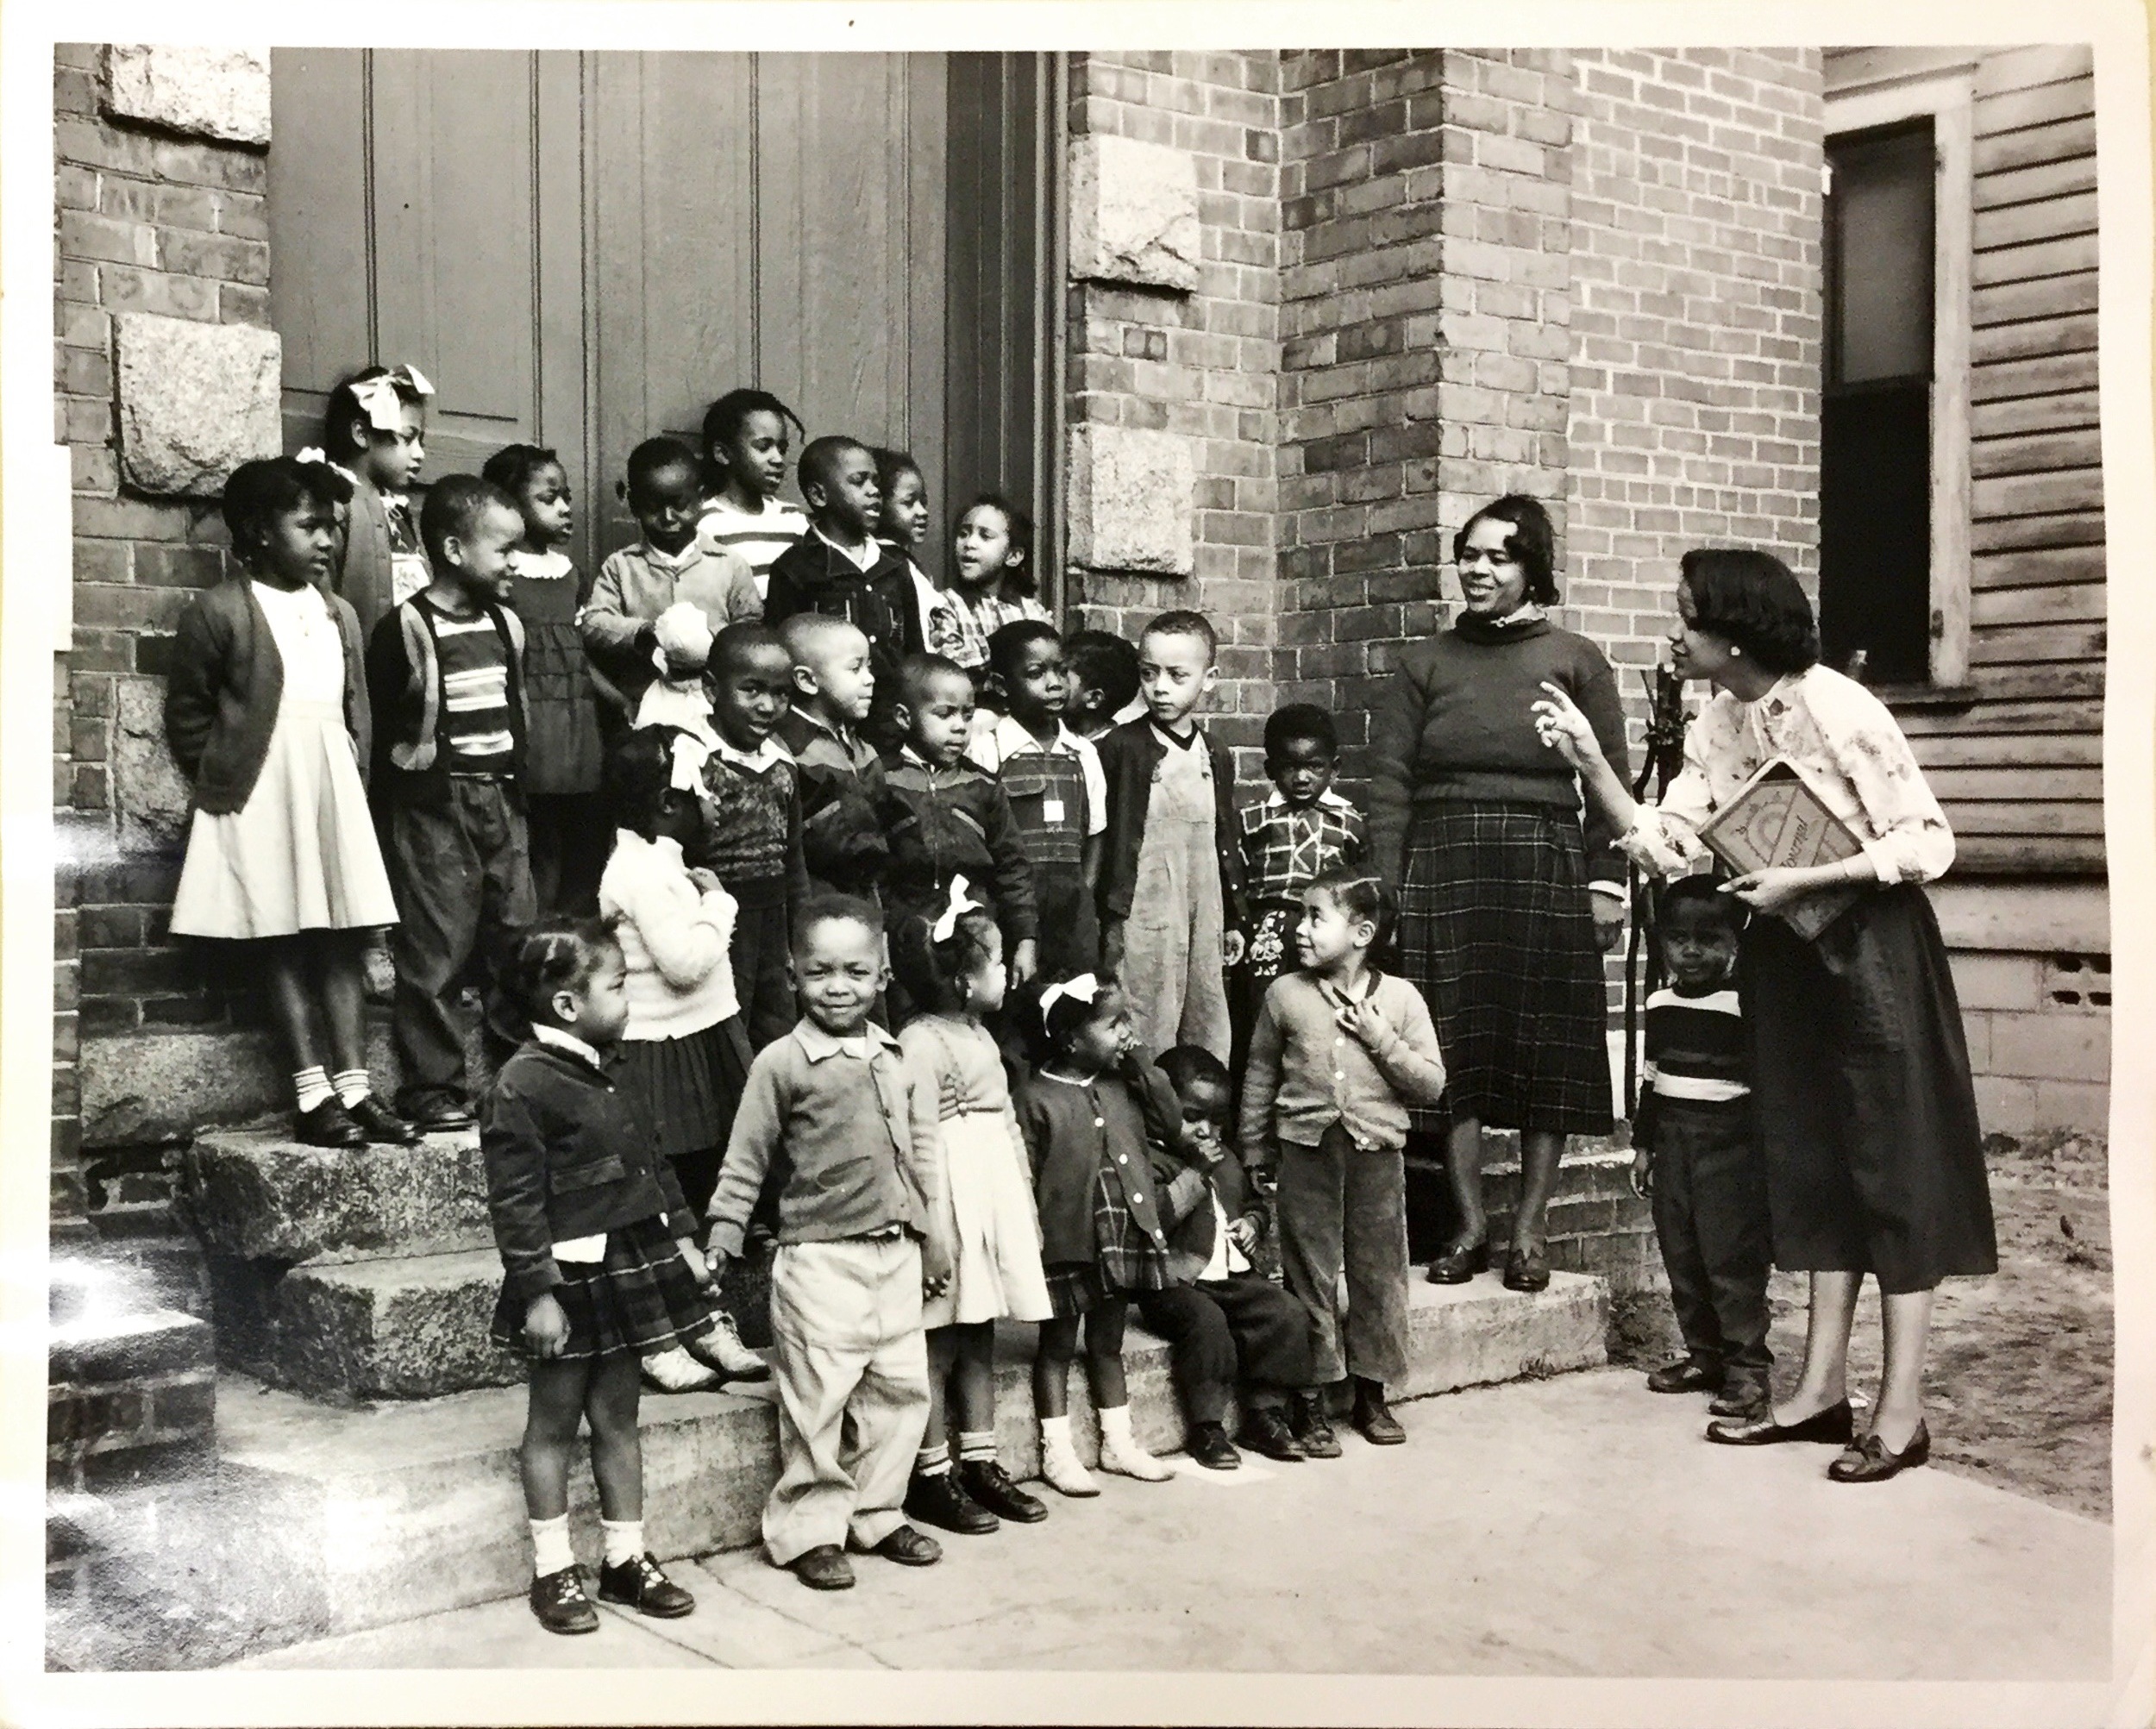 Mrs. Emily Ivory (widow of Cecil A. Ivory, superintendent of the nursery, leads the children of Hermon United Presbyterian Church in Rock Hill, S.C., in song. Cecil Ivory served the Hermon Church from 1949-1961, From congregational vertical file, RG425.